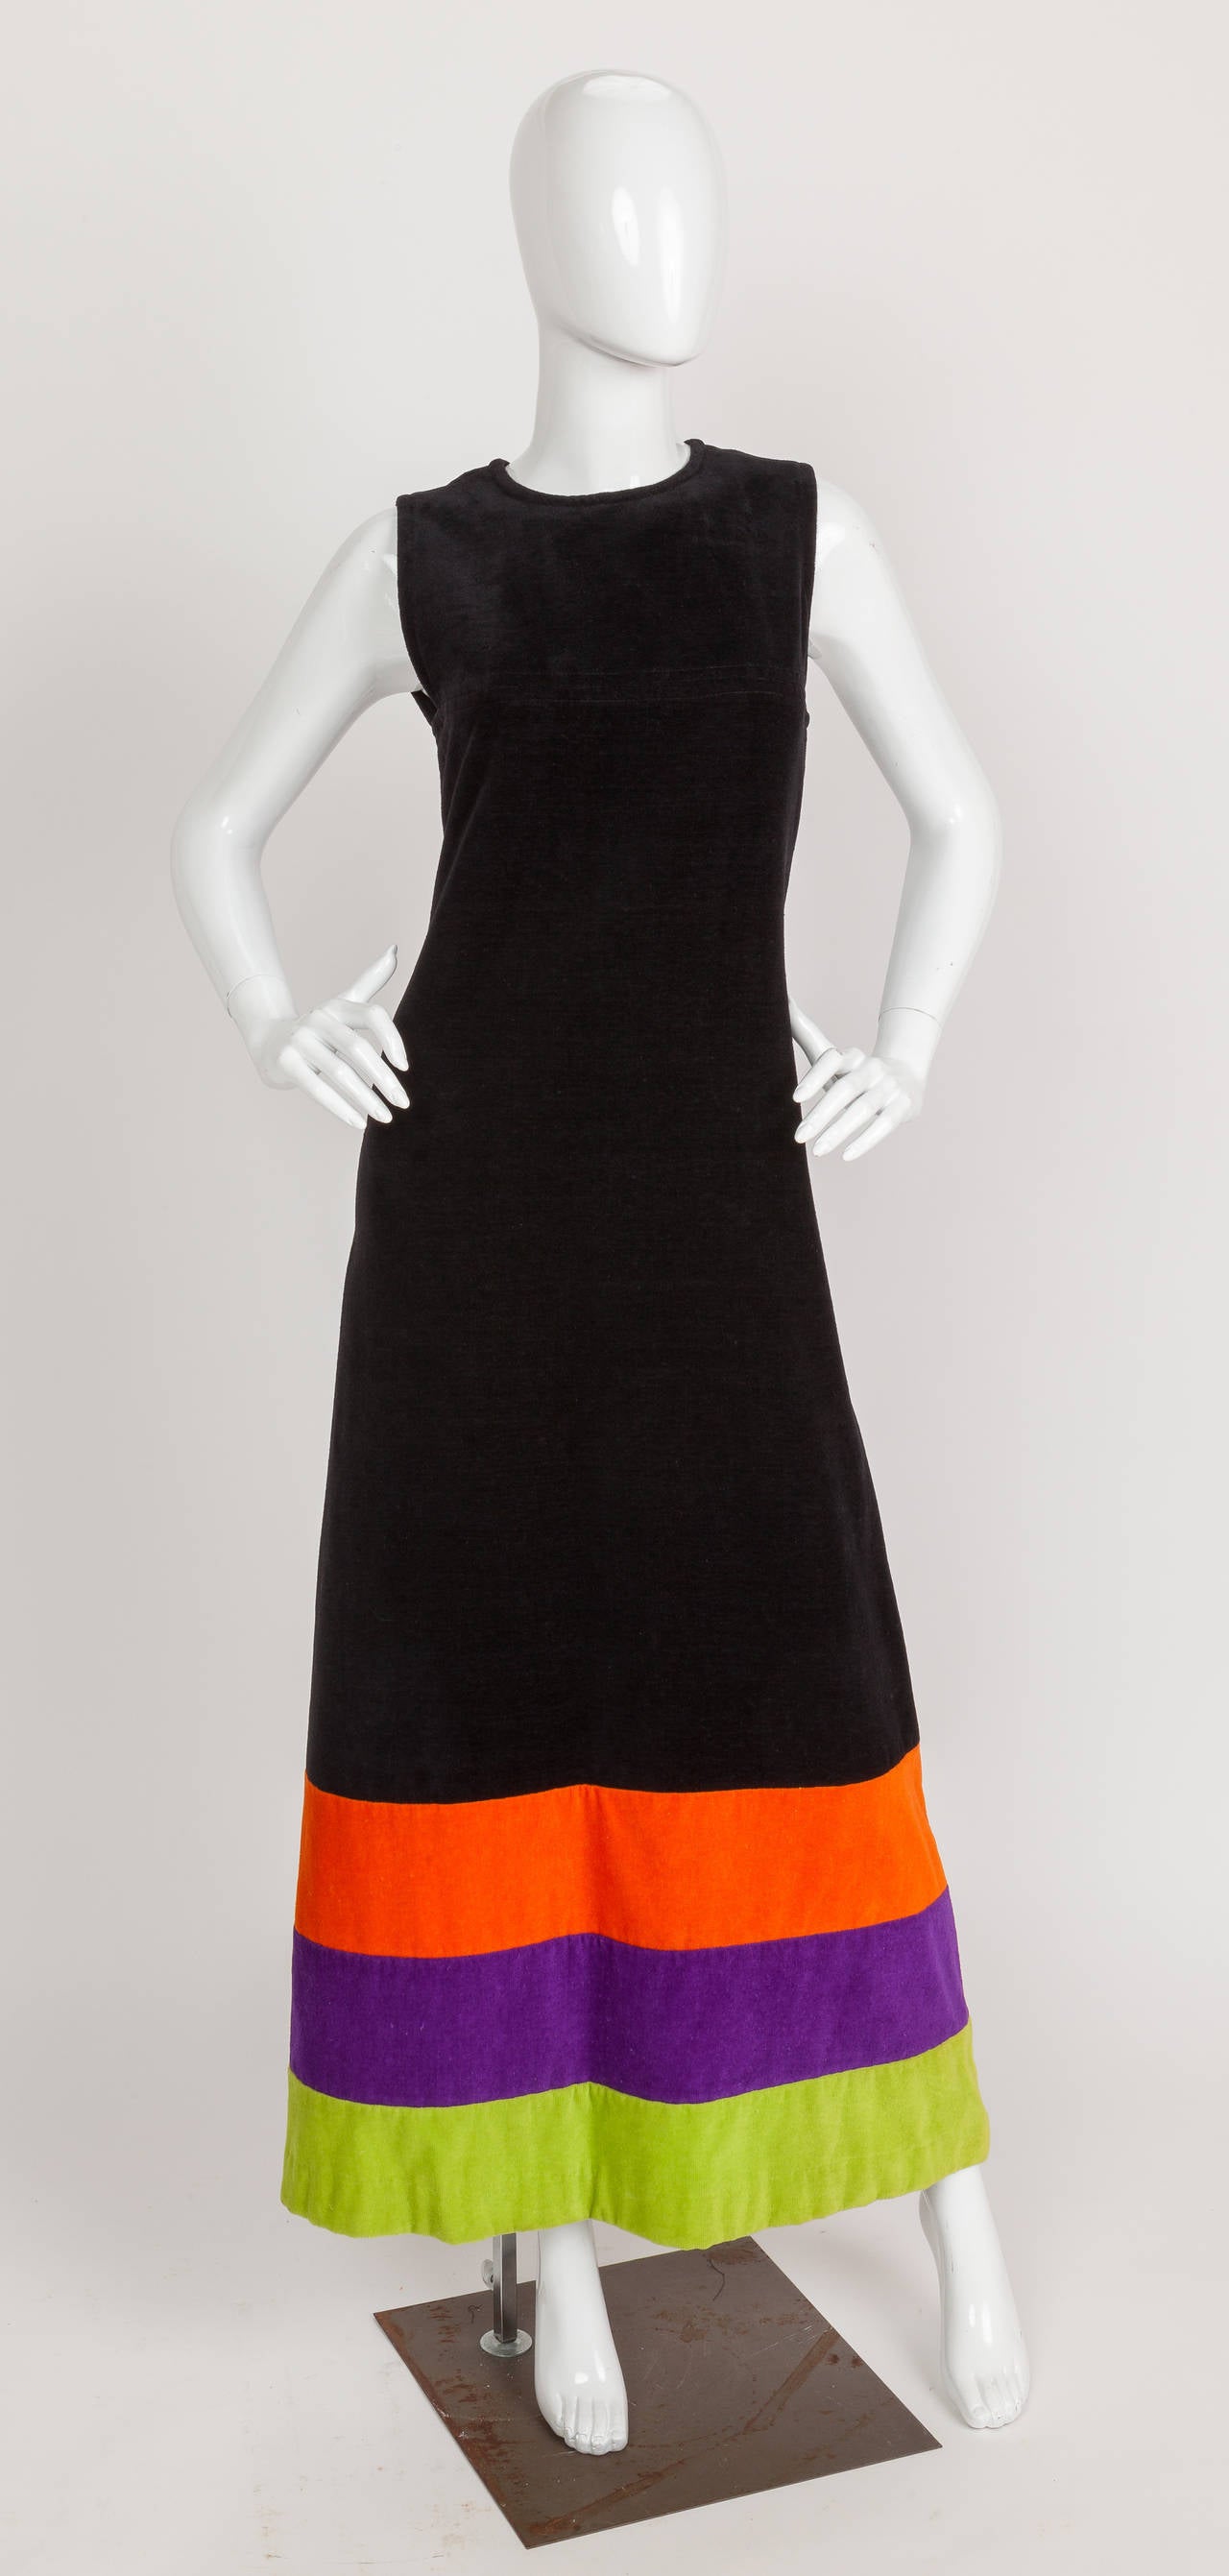 This 1970s Pierre Cardin terry cloth maxi dress with fitted bodice, A-line silhouette and bright orange, acid green and purple bands at the hem. Zips up the center back. In excellent condition. Size tag 38. Labeled: Pierre Cardin Creation